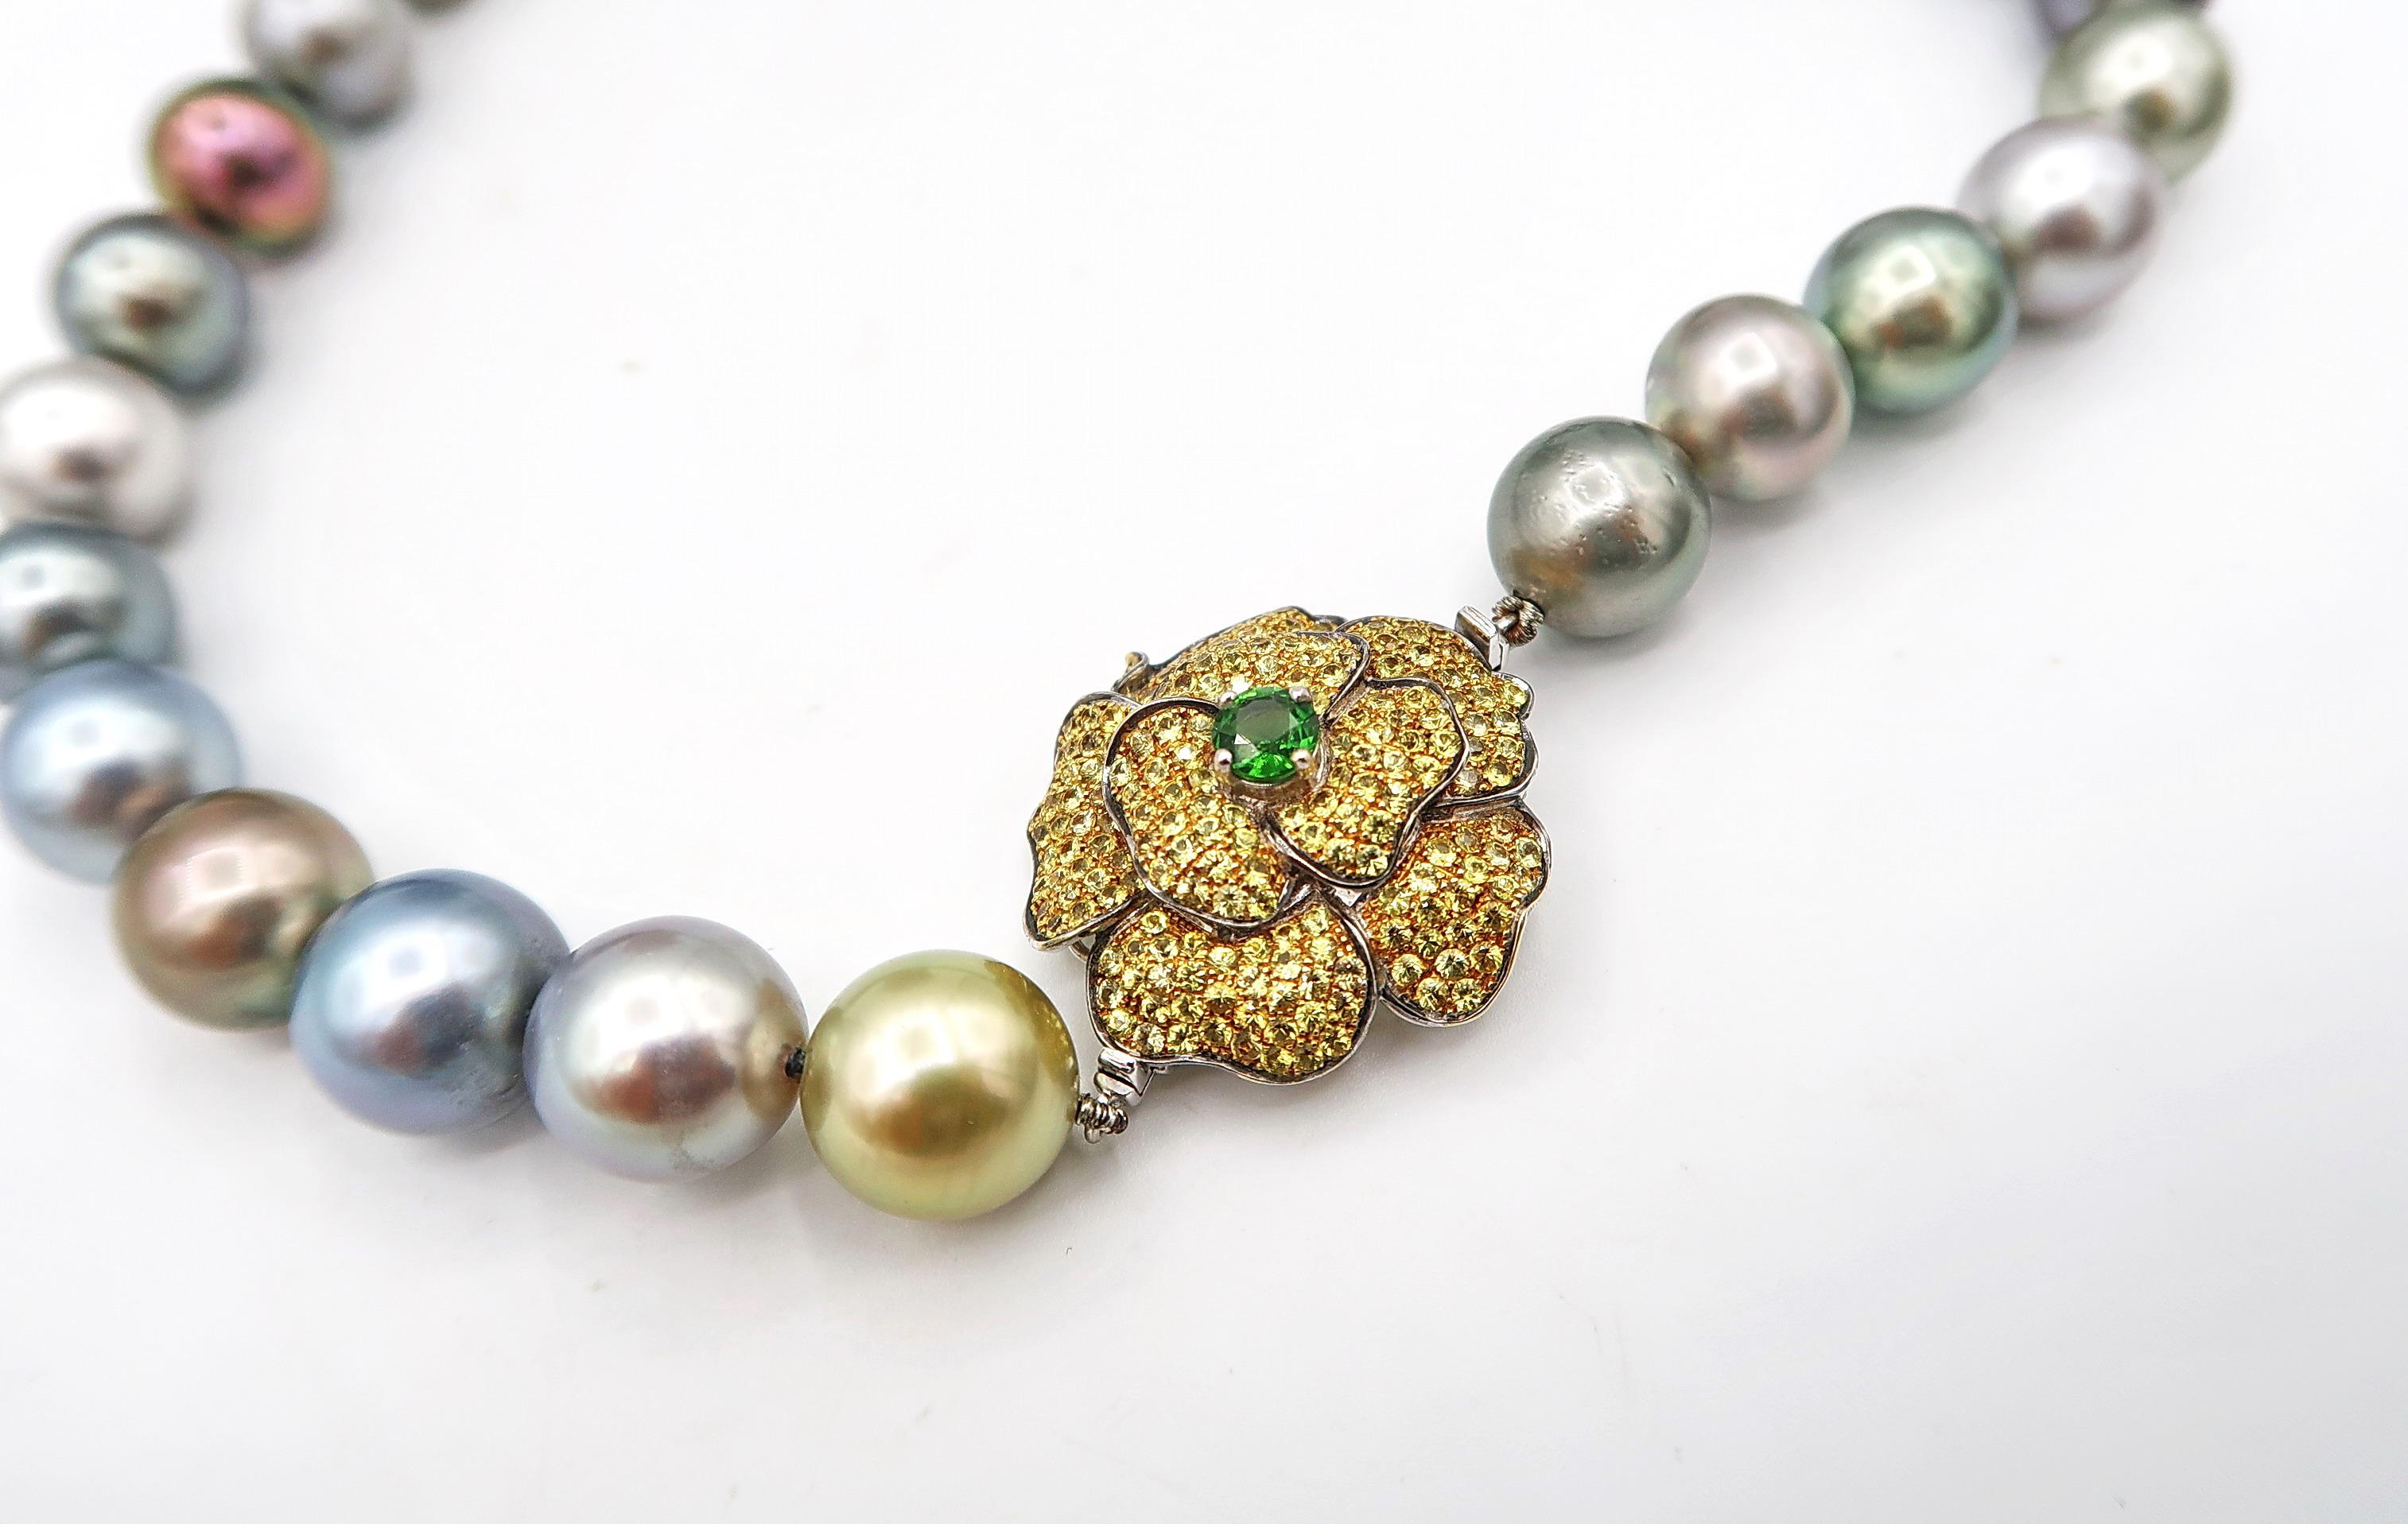 BOON Tsavorite Yellow Sapphire Flower Clasp in 18 Karat Gold and Multicolour Tahitian and South Sea Pearl Necklace

Yellow Sapphire: 3.47cts.
Tsavorite: 0.48ct.
Tahitian and South Sea Pearls: 32 pcs.
Gold: 18K 14.04g.